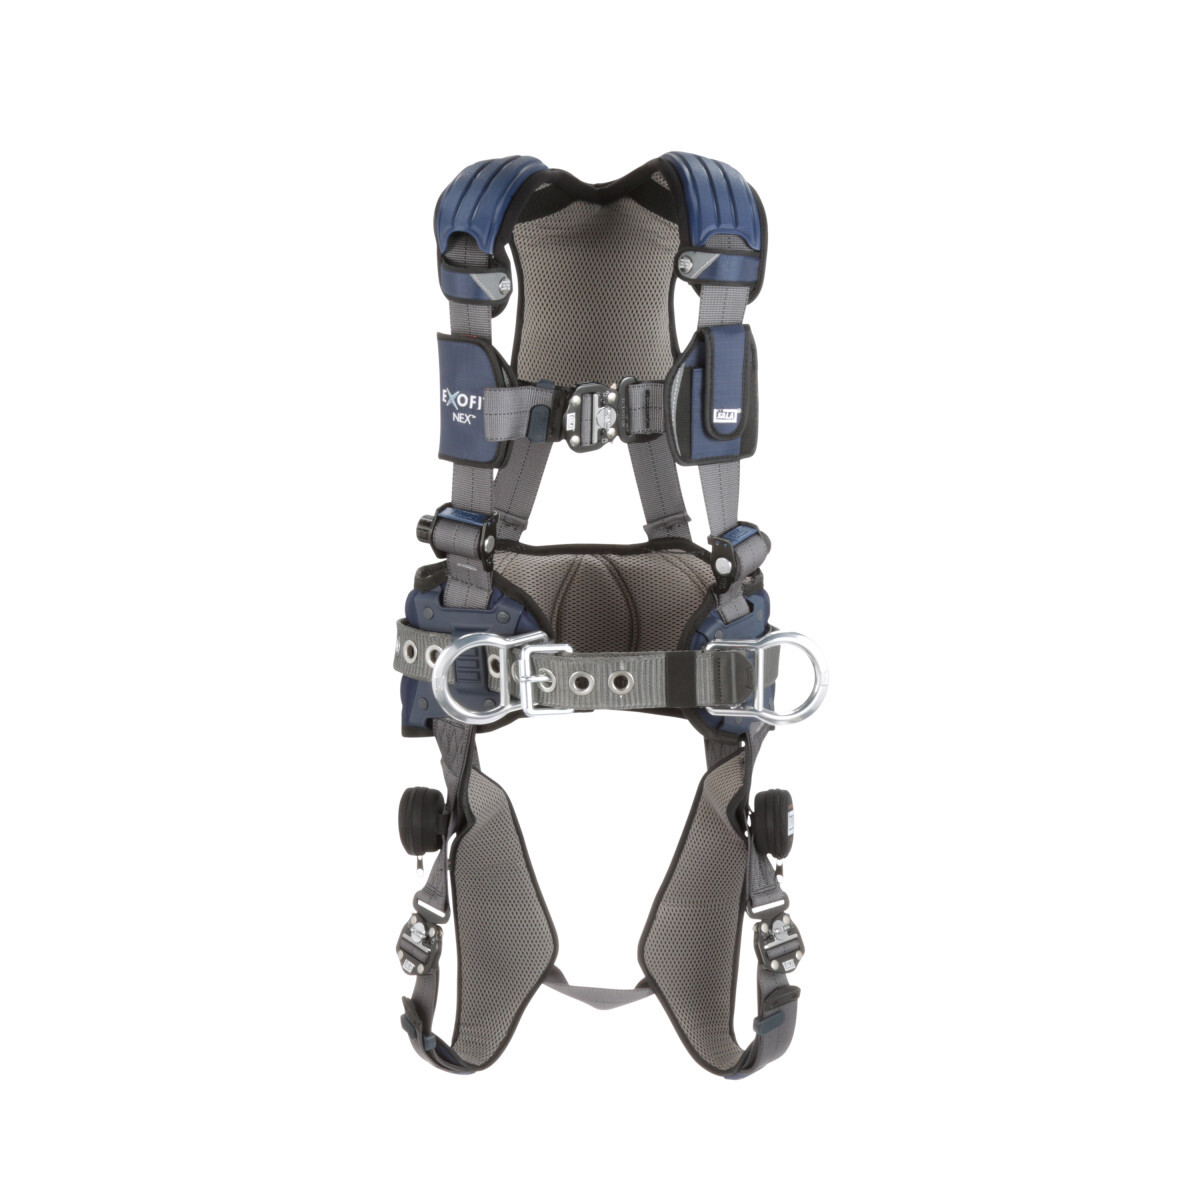 3M™ DBI-SALA® Large ExoFit NEX™ Construction/Full Body Style Harness With Tech-Lite™ Aluminum Back D-Ring, Duo-Lok™ Quick Connec